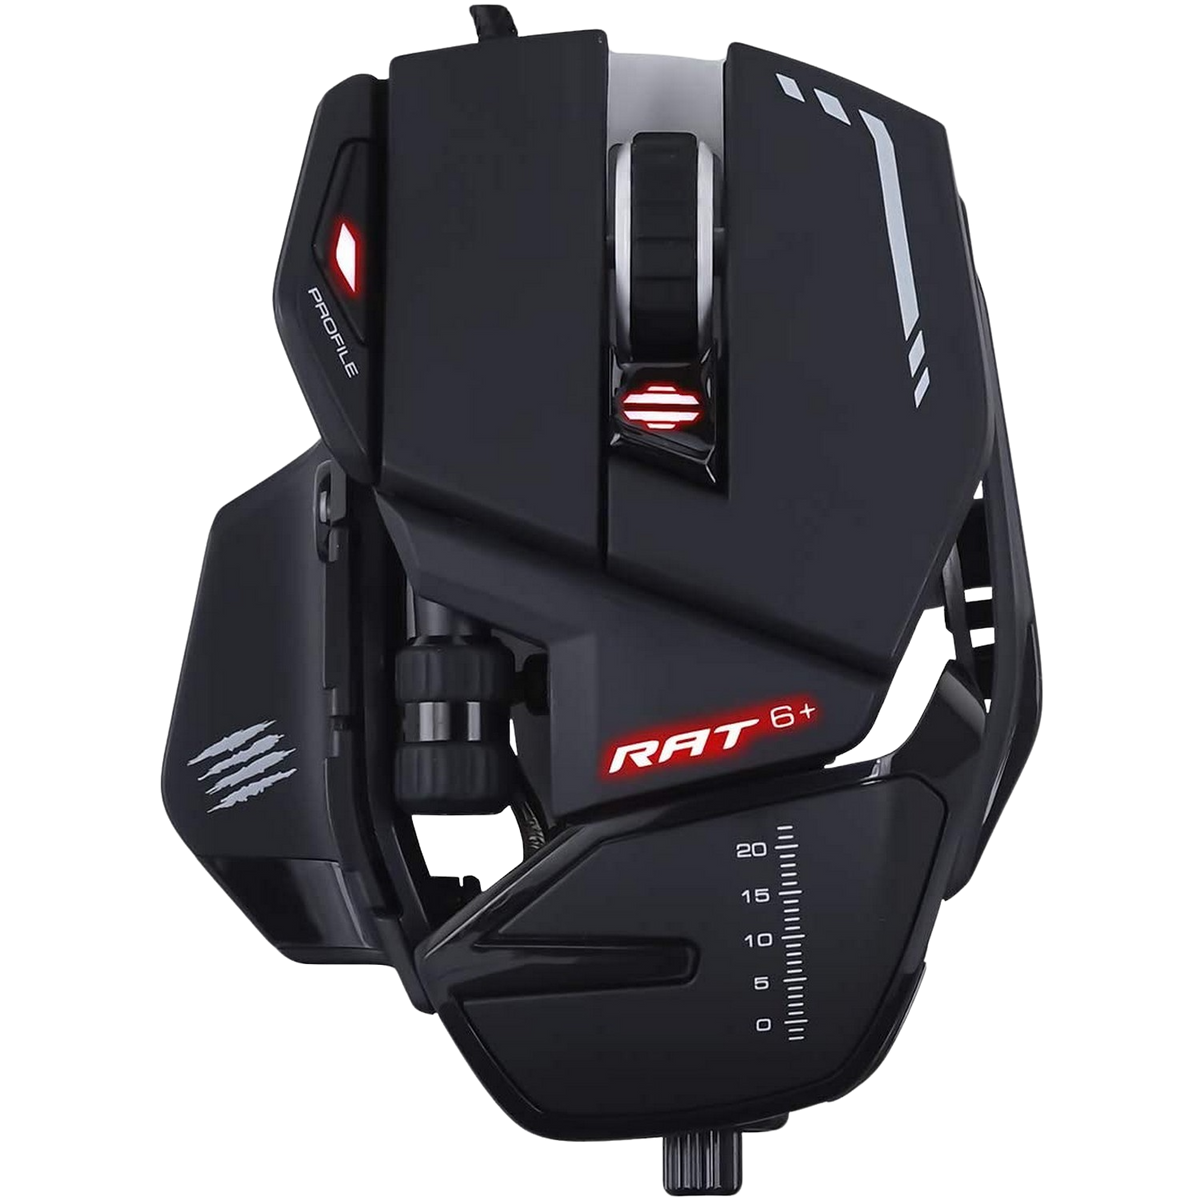 CATZ GAMING R.A.T. Gaming OPTICAL BL MAD MOUSE, Schwarz MR04DCINBL000-0 6+ Maus,